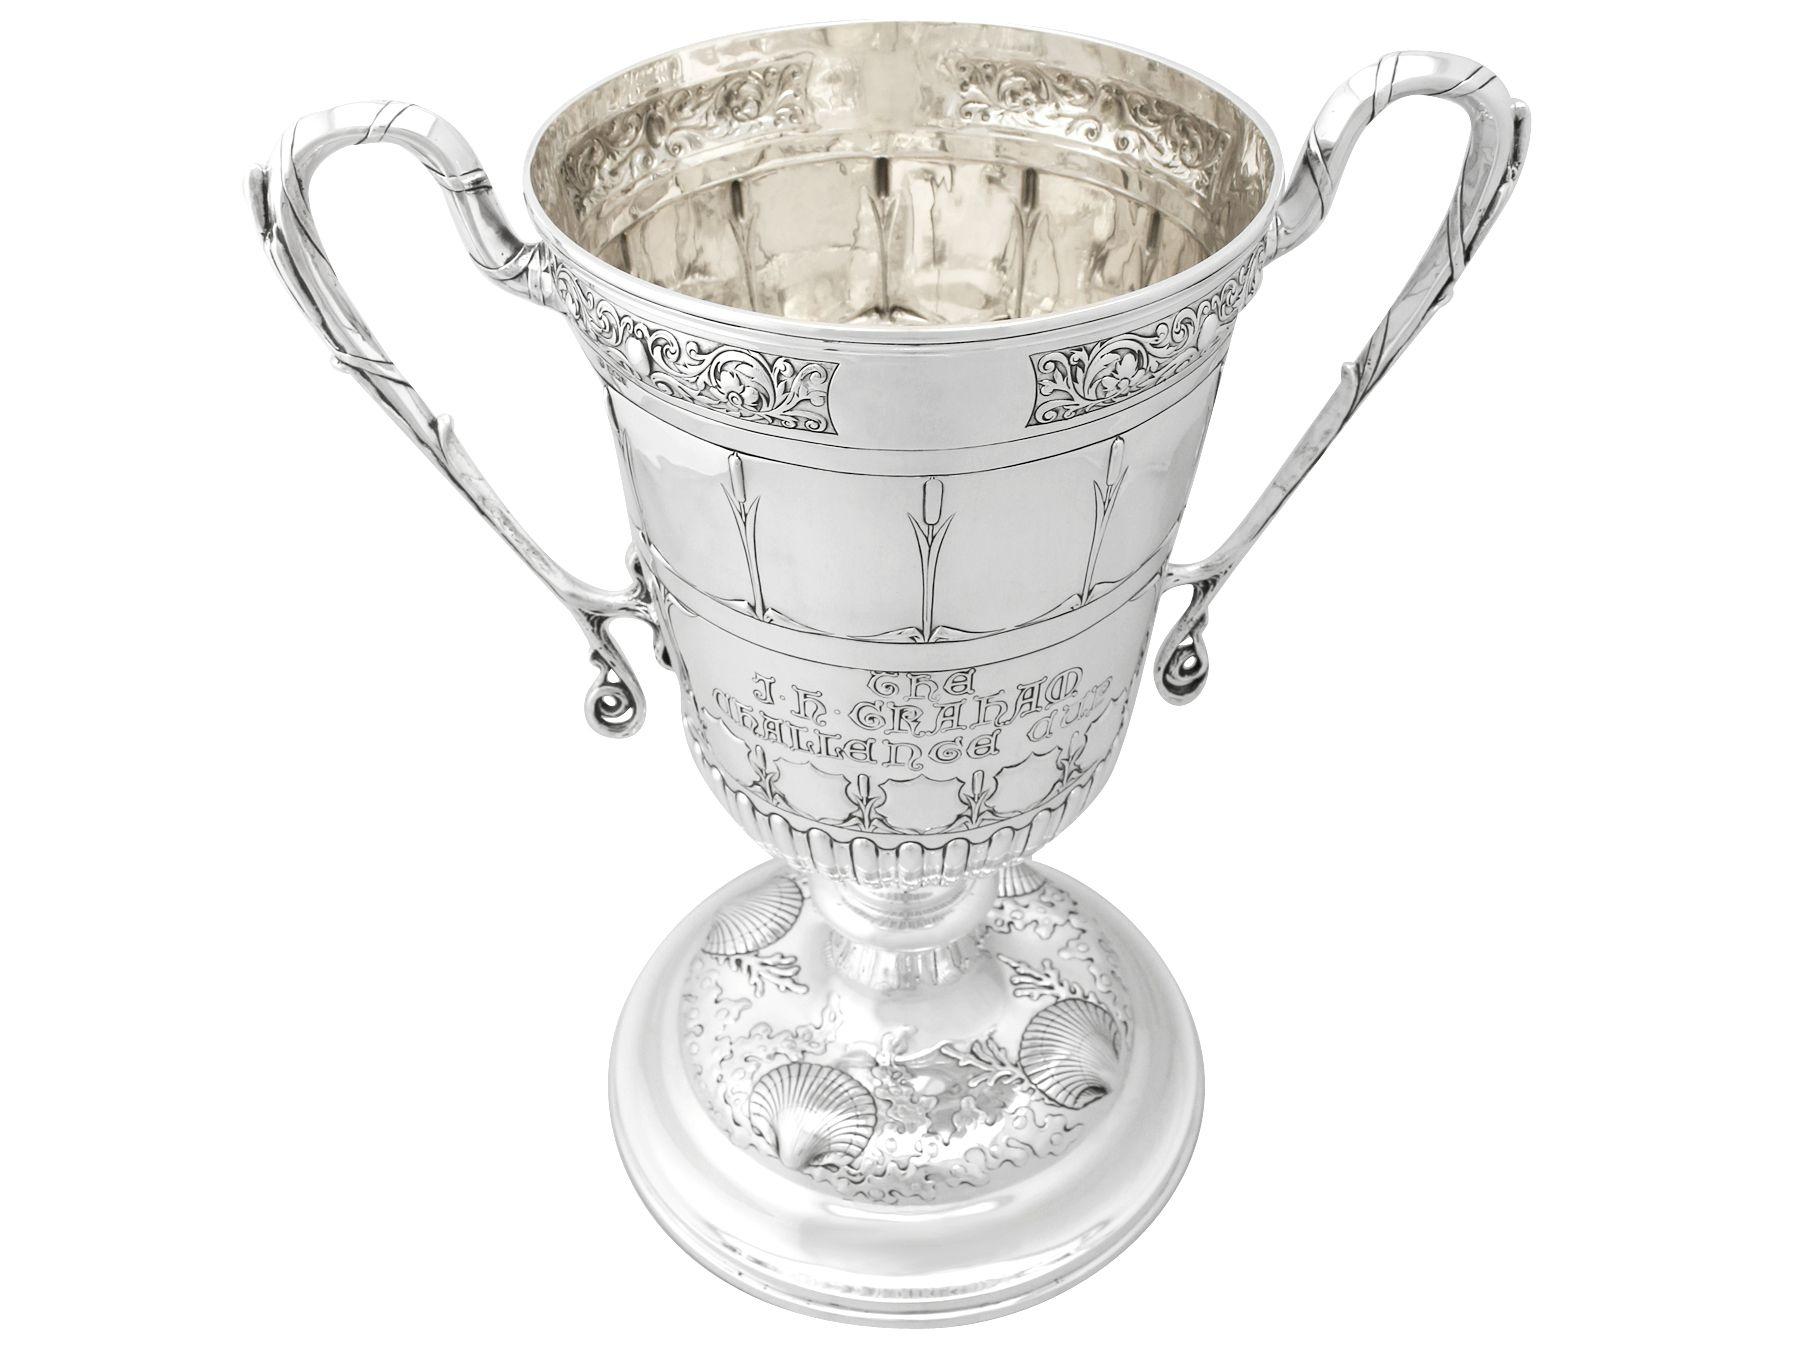 English Antique Edwardian Sterling Silver Presentation or Champagne Cup and Cover For Sale